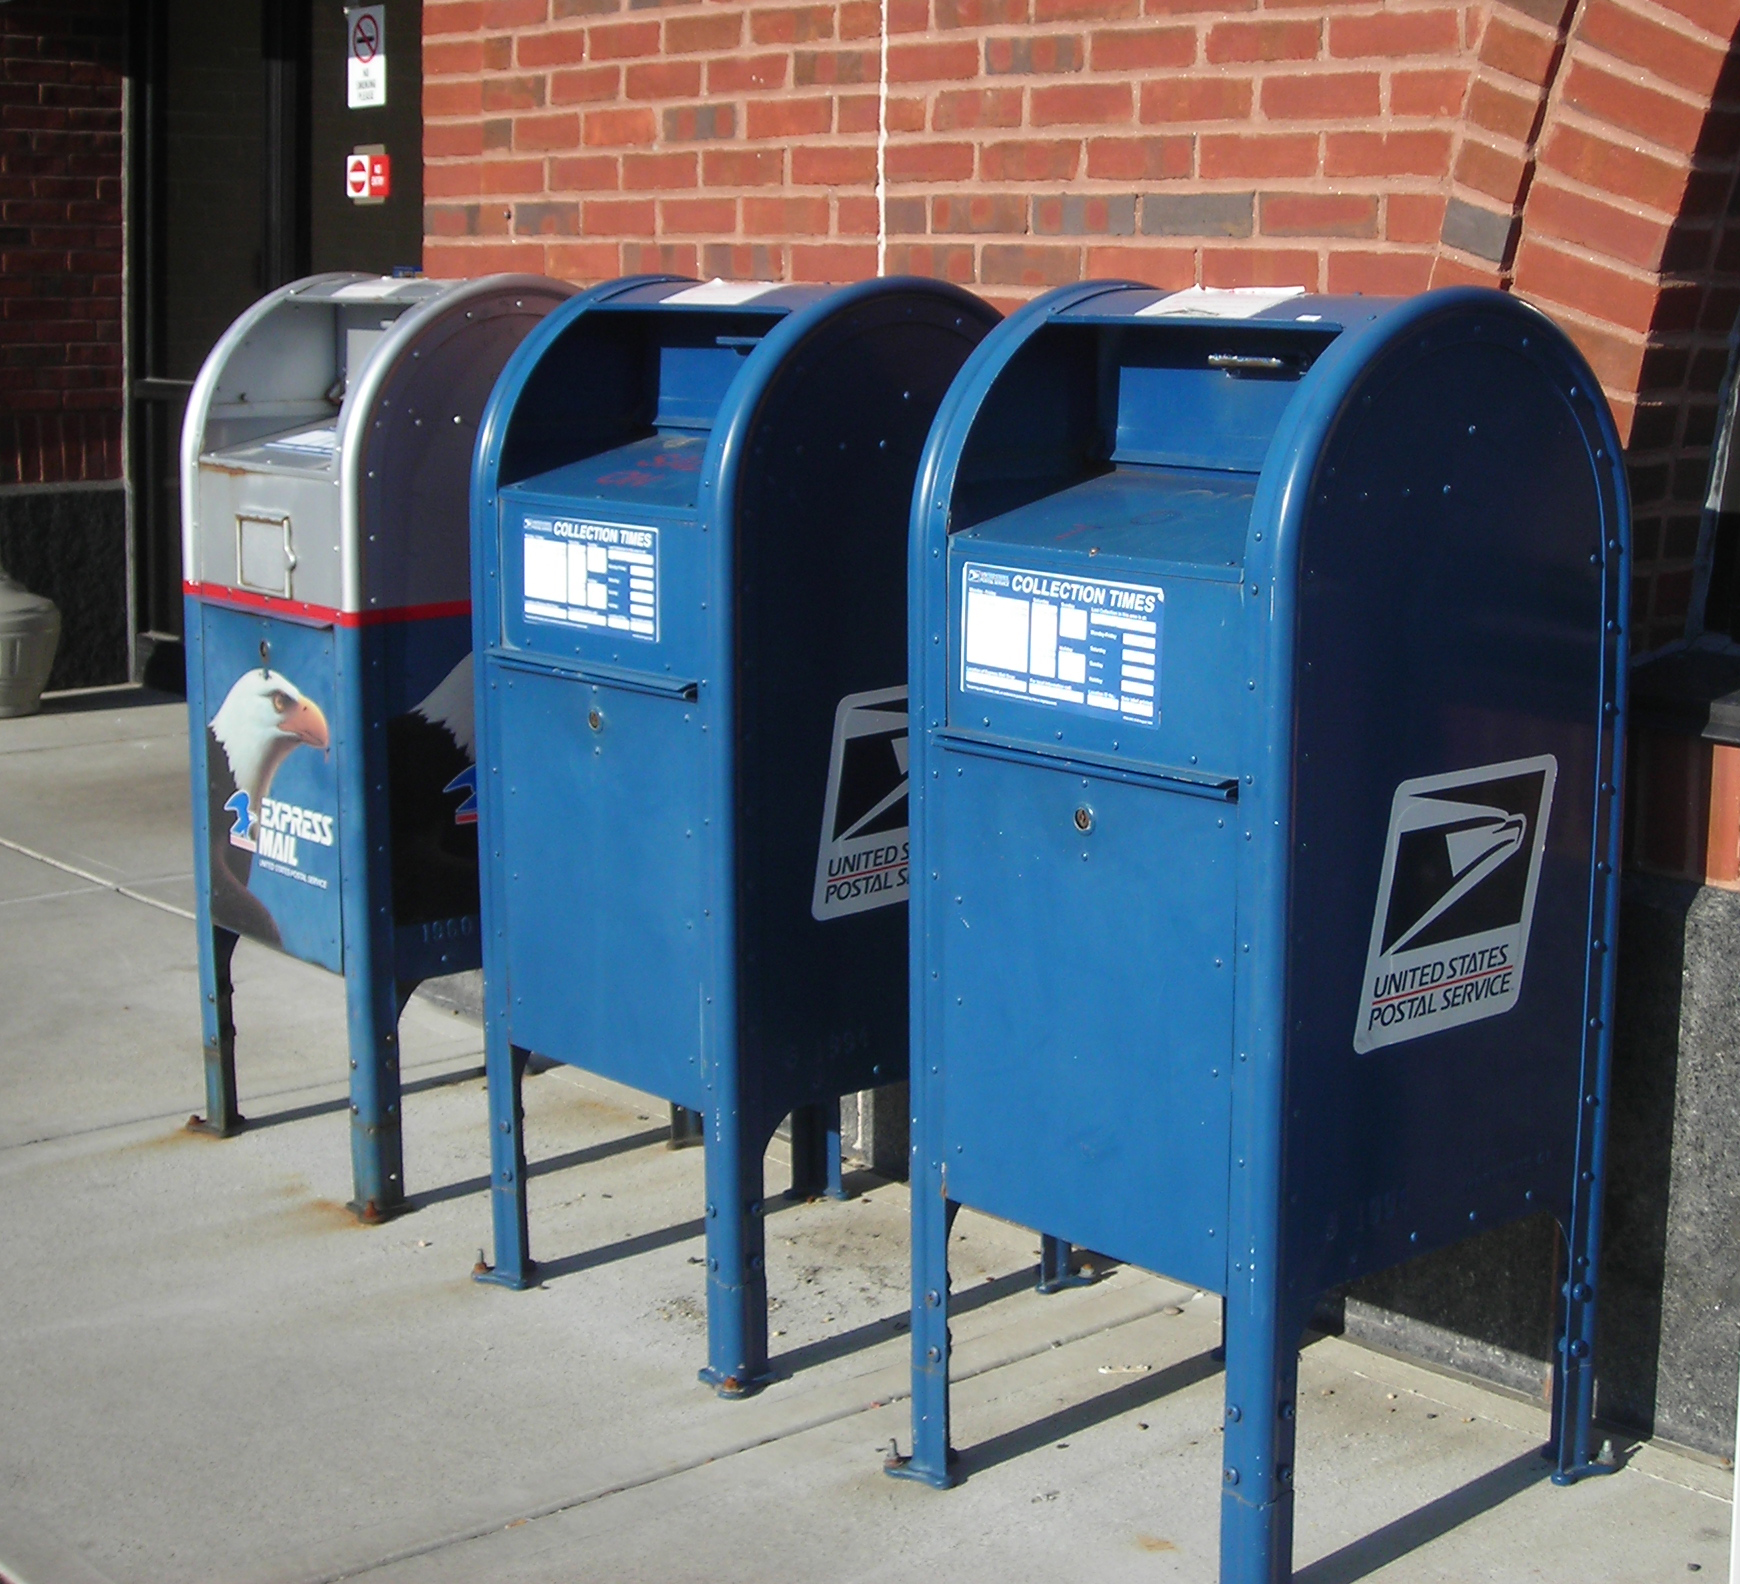 File:USPS mailboxes.jpg - Wikimedia Commons